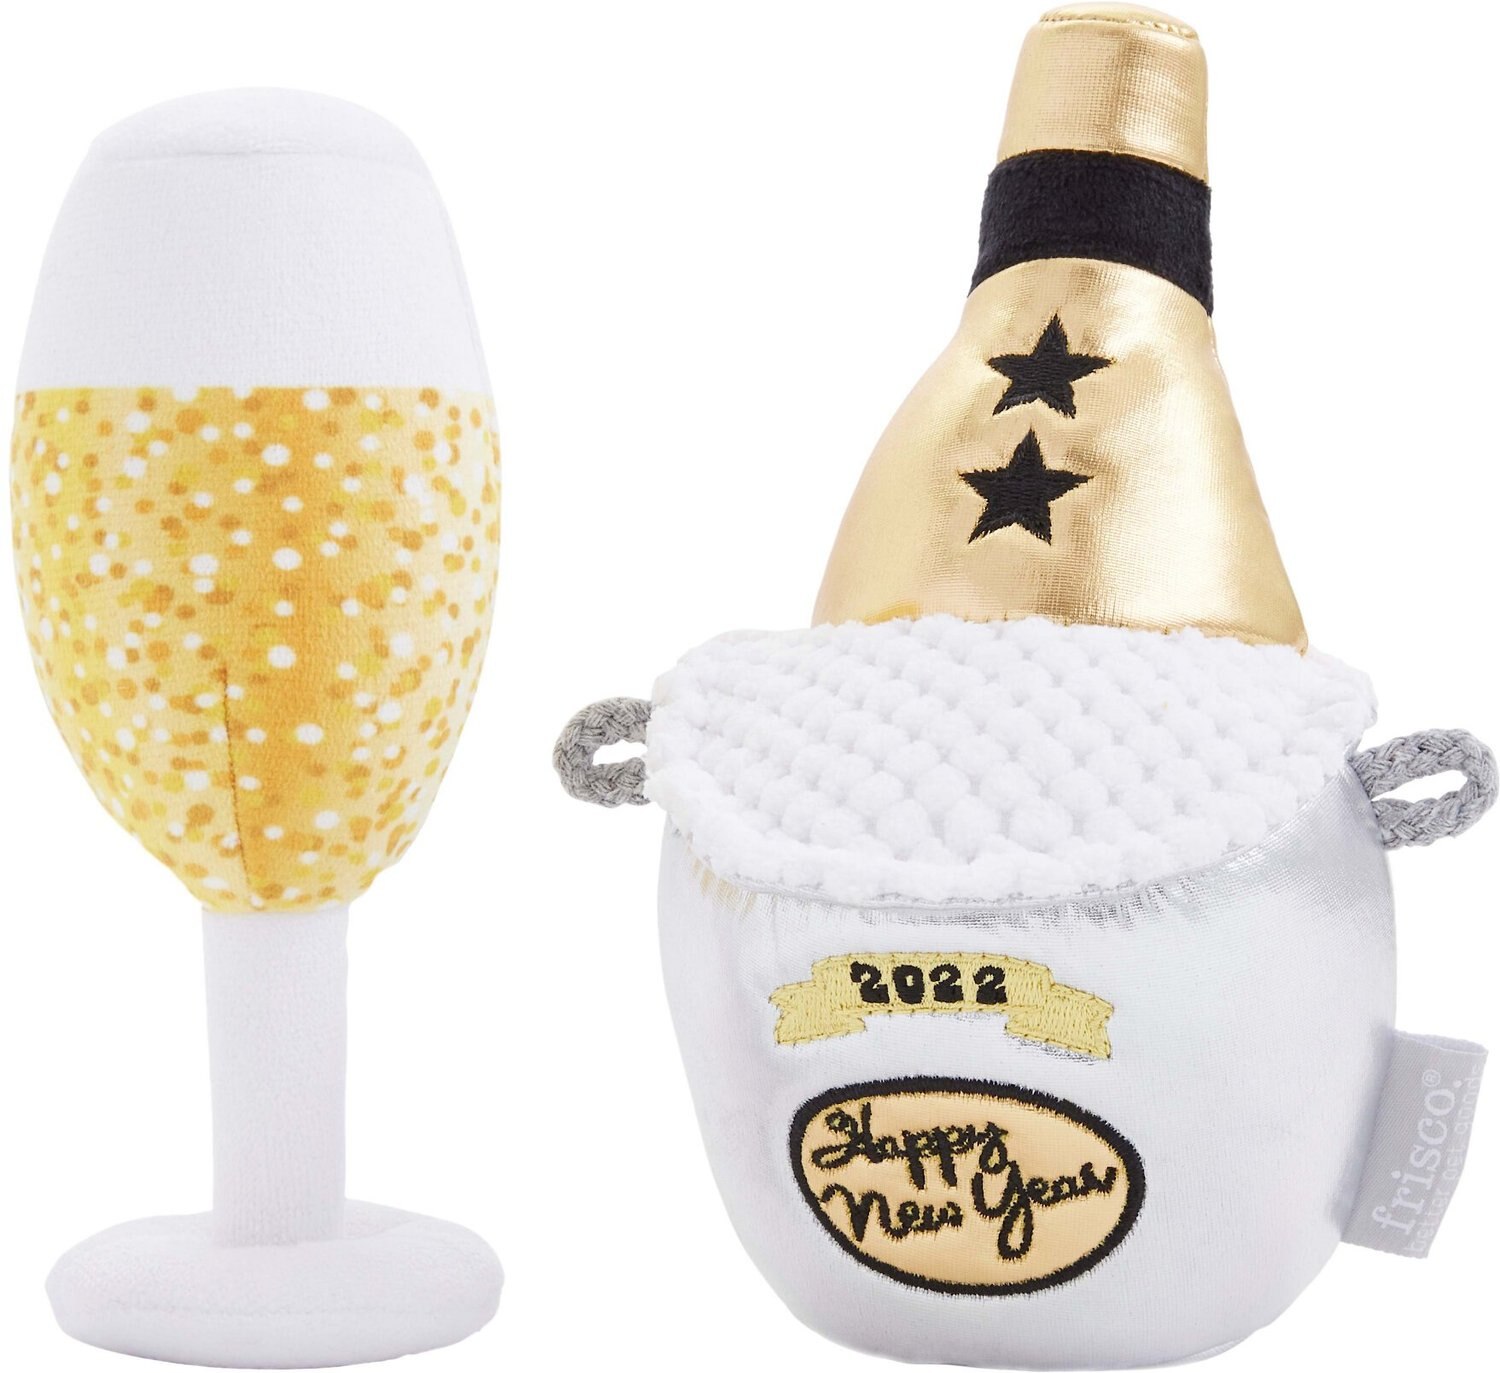 FRISCO New Year's Eve Champagne & Flute Plush Squeaky Dog Toy, 2 count